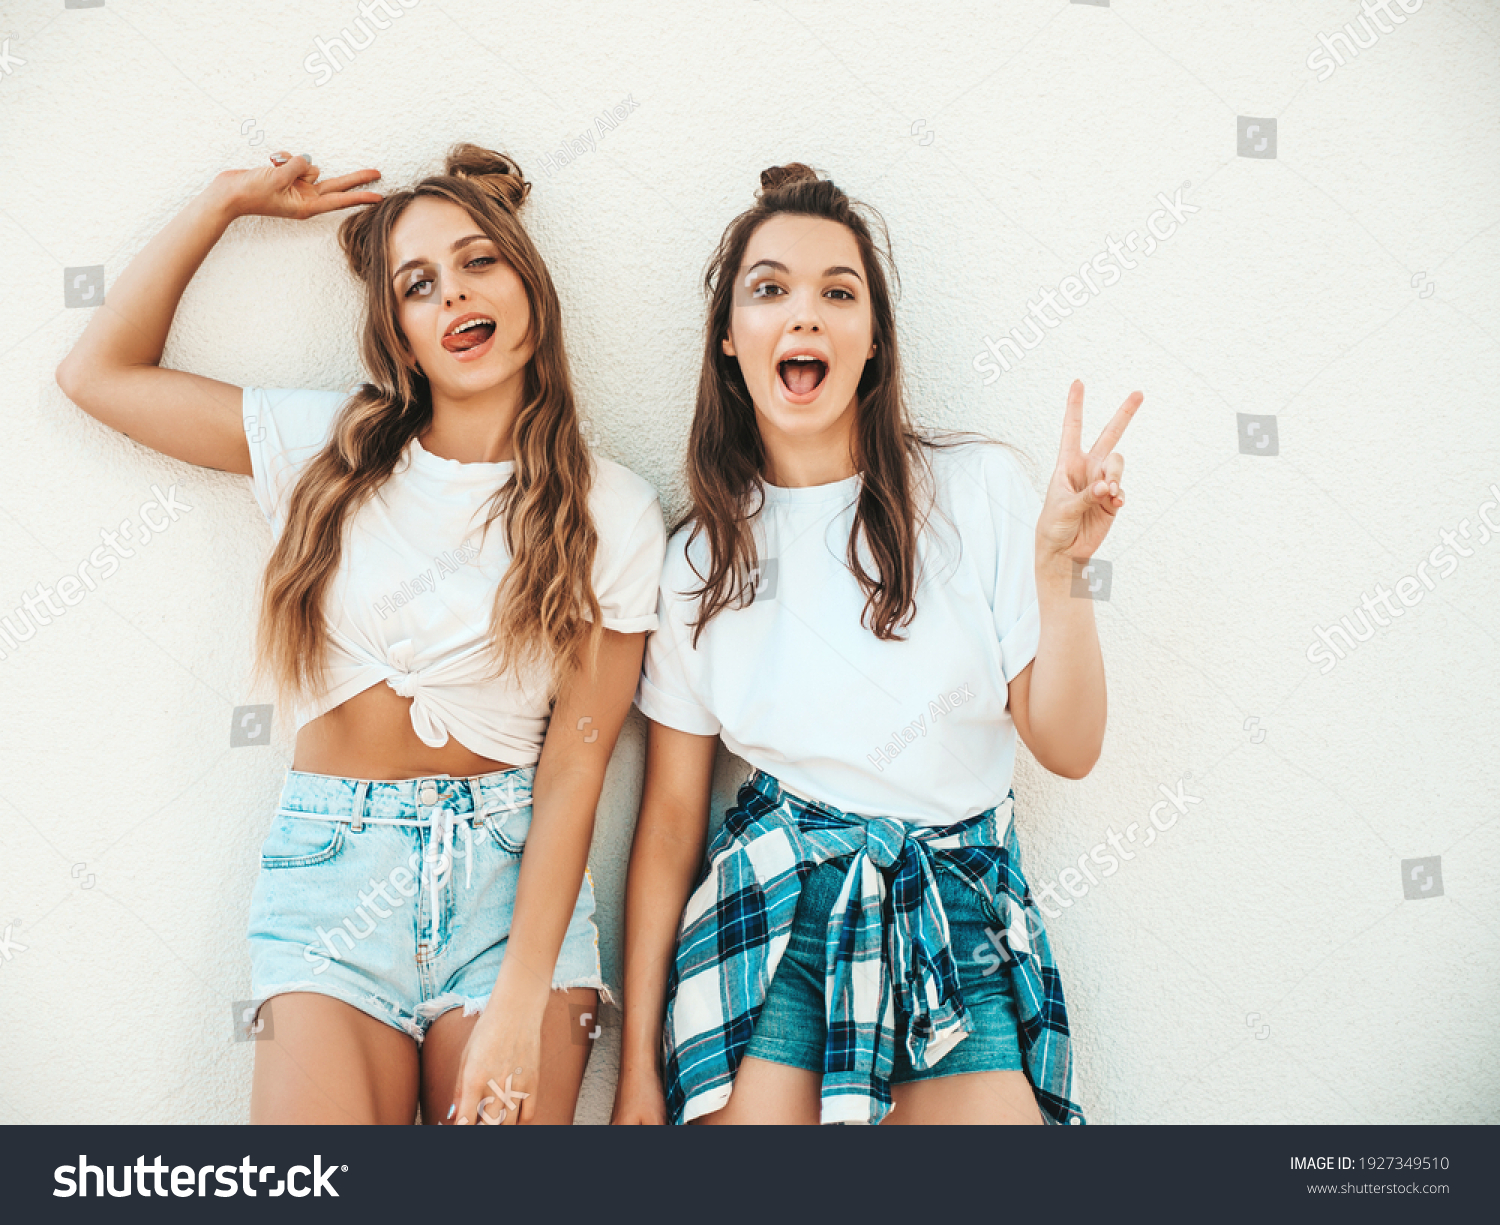 Portrait of two young beautiful smiling hipster women in trendy summer white t-shirt clothes.Sexy carefree women posing on street background. Positive models having fun, hugging and going crazy #1927349510